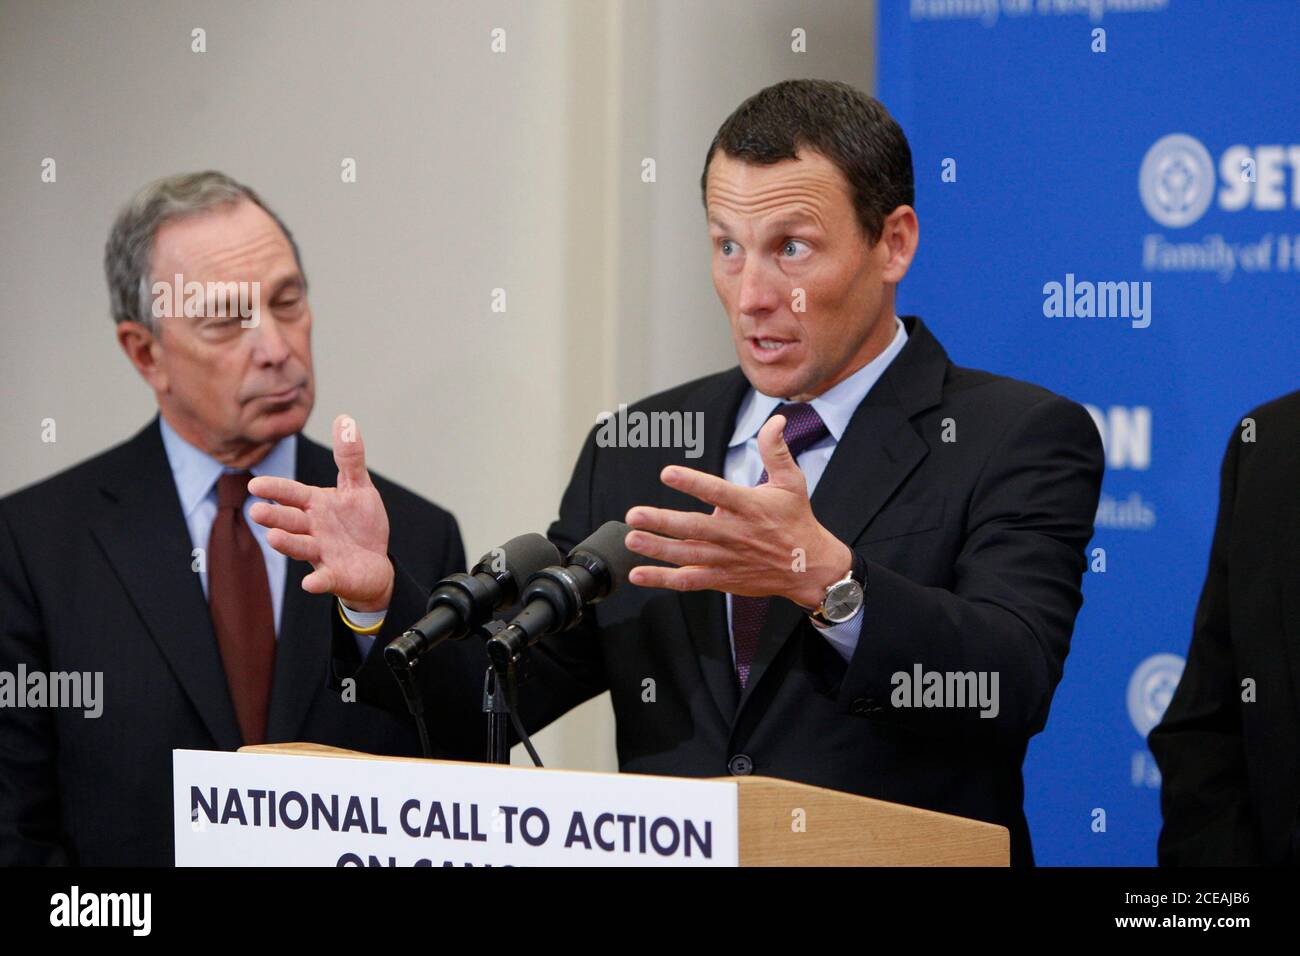 Austin, Texas, USA, January 18, 2008:  Lance Armstrong (r) speaks about a cancer health initiative after  touring a cancer ward at Brackenridge Hospital in Austin with New York City Mayor Michael Bloomberg (l).  ©Bob Daemmrich Stock Photo